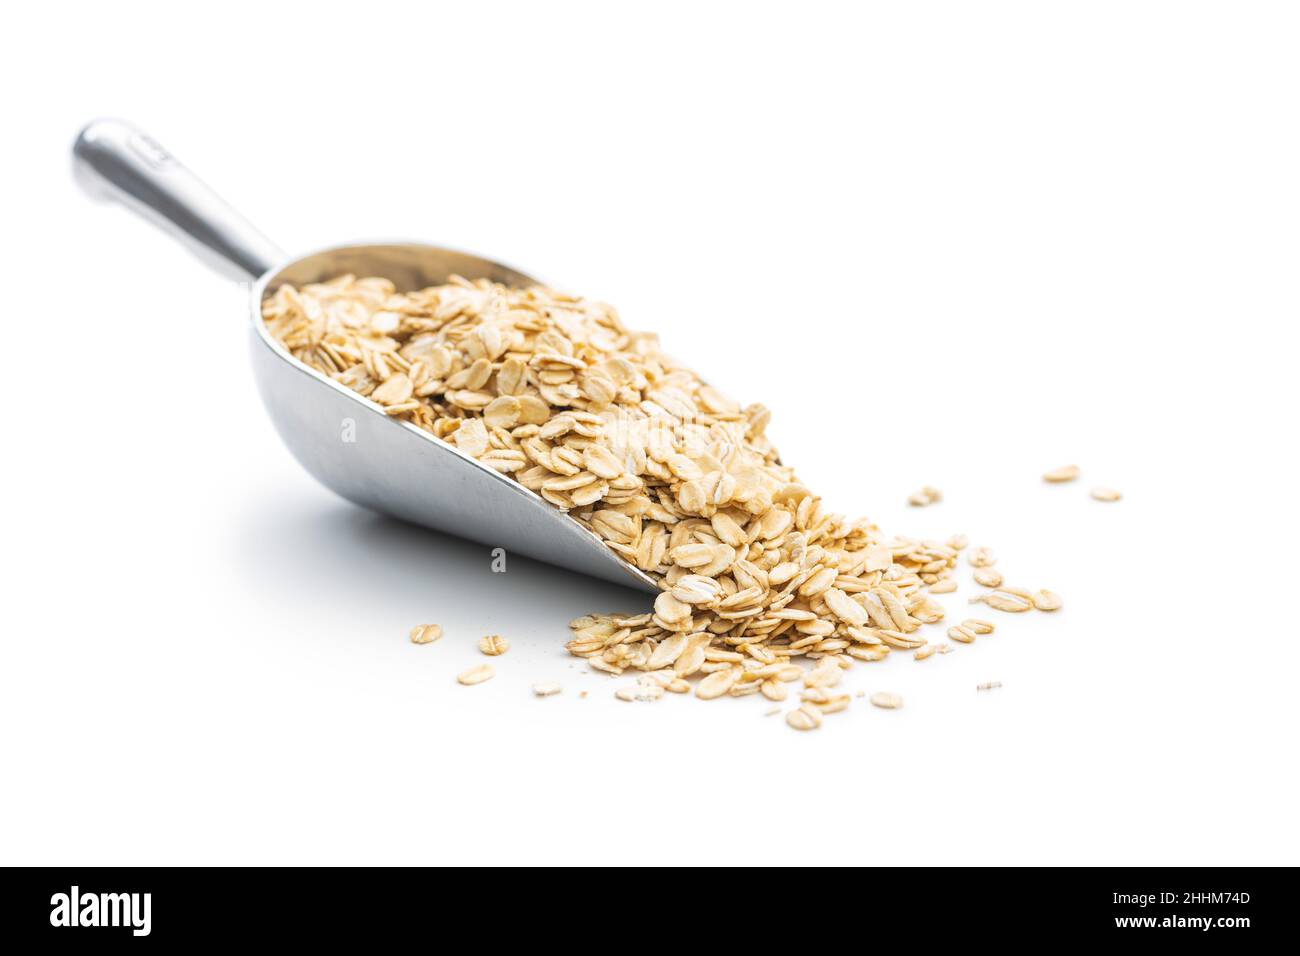 Breakfast cereals. Uncooked oatmeal. Raw oat flakes isolated on white background. Stock Photo